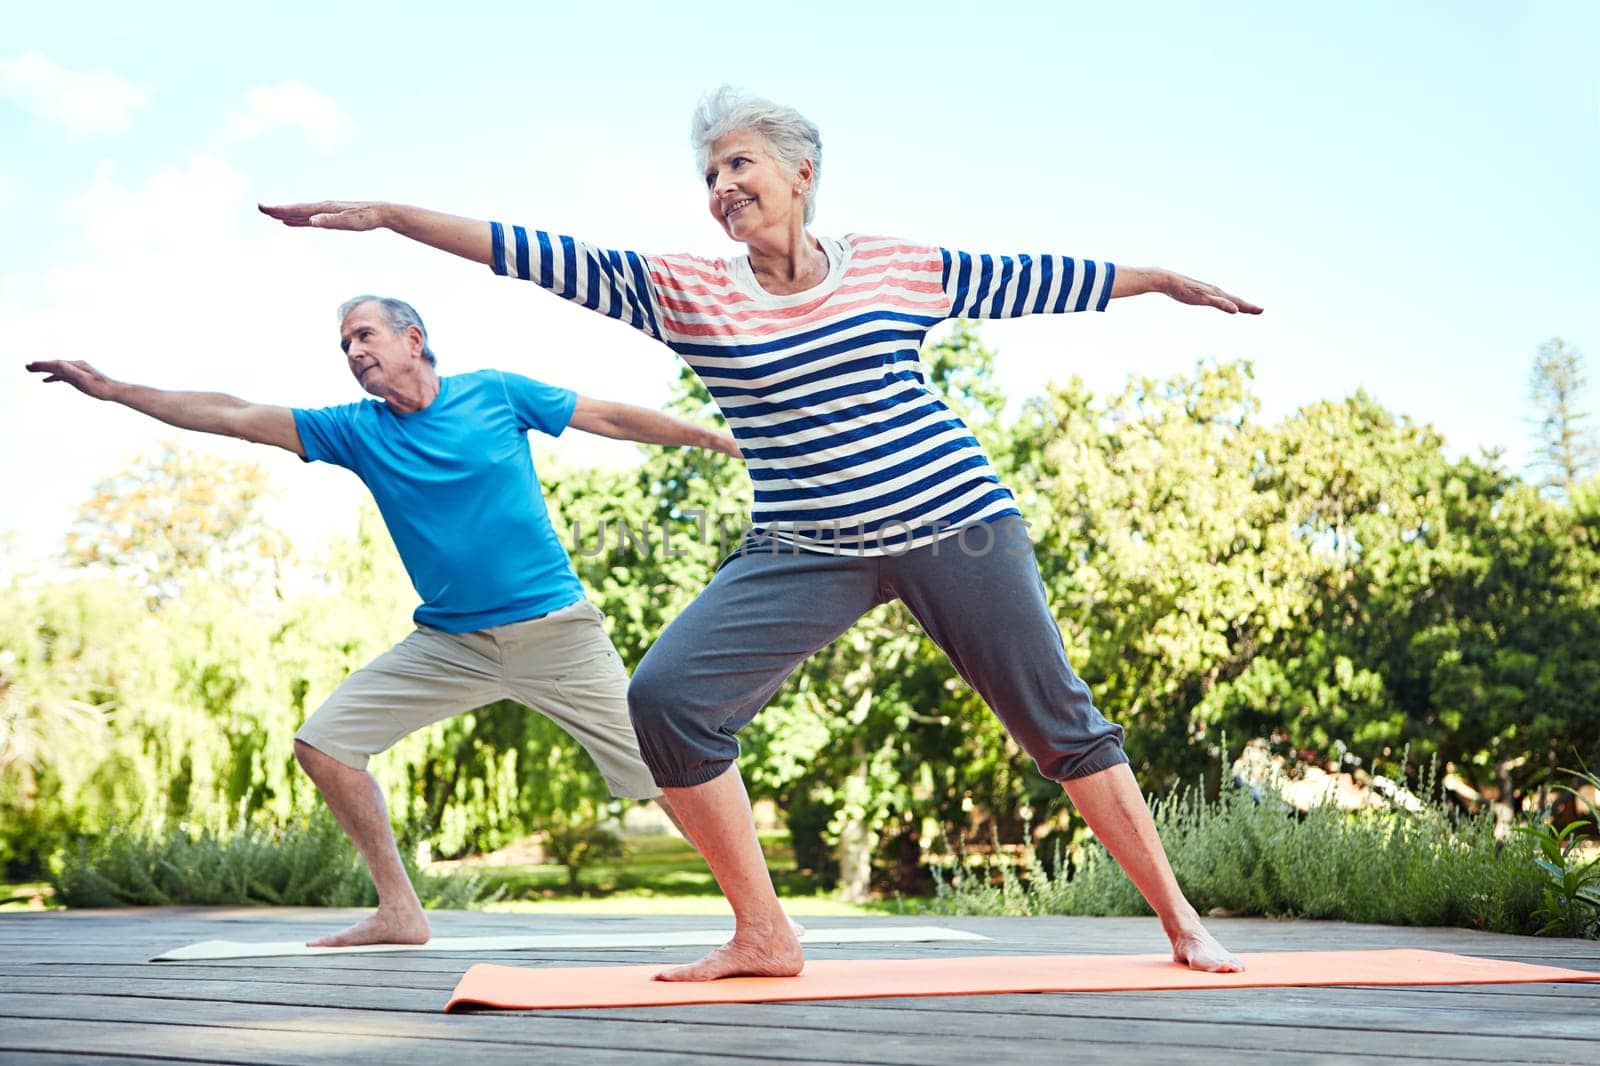 Yoga poses for yogis of all ages. a senior couple doing yoga together outdoors